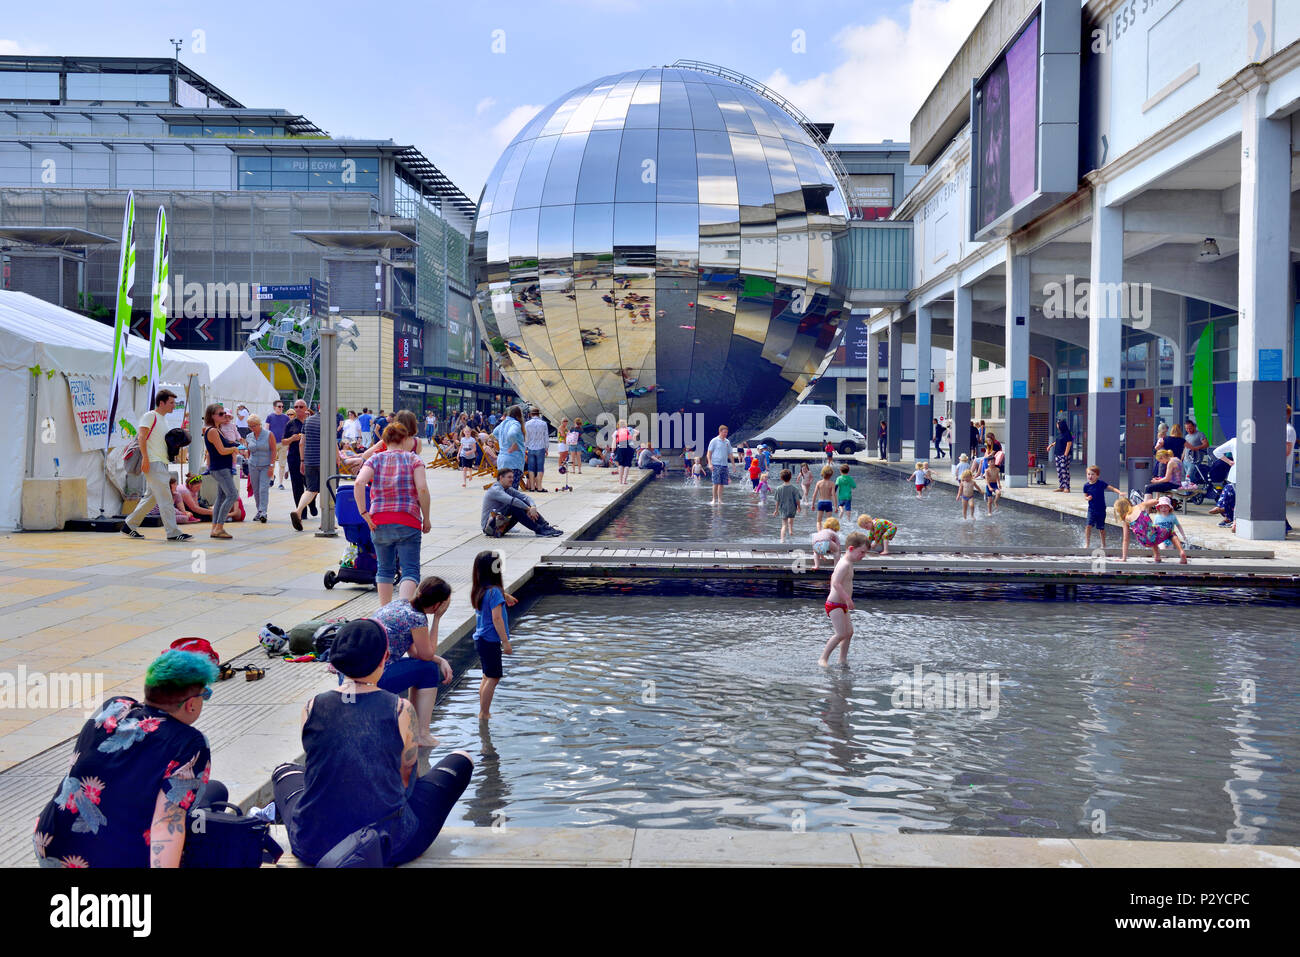 Bristol Millennium Square with shallow pools with kids playing and the mirrored Planetarium, festival tents, UK Stock Photo